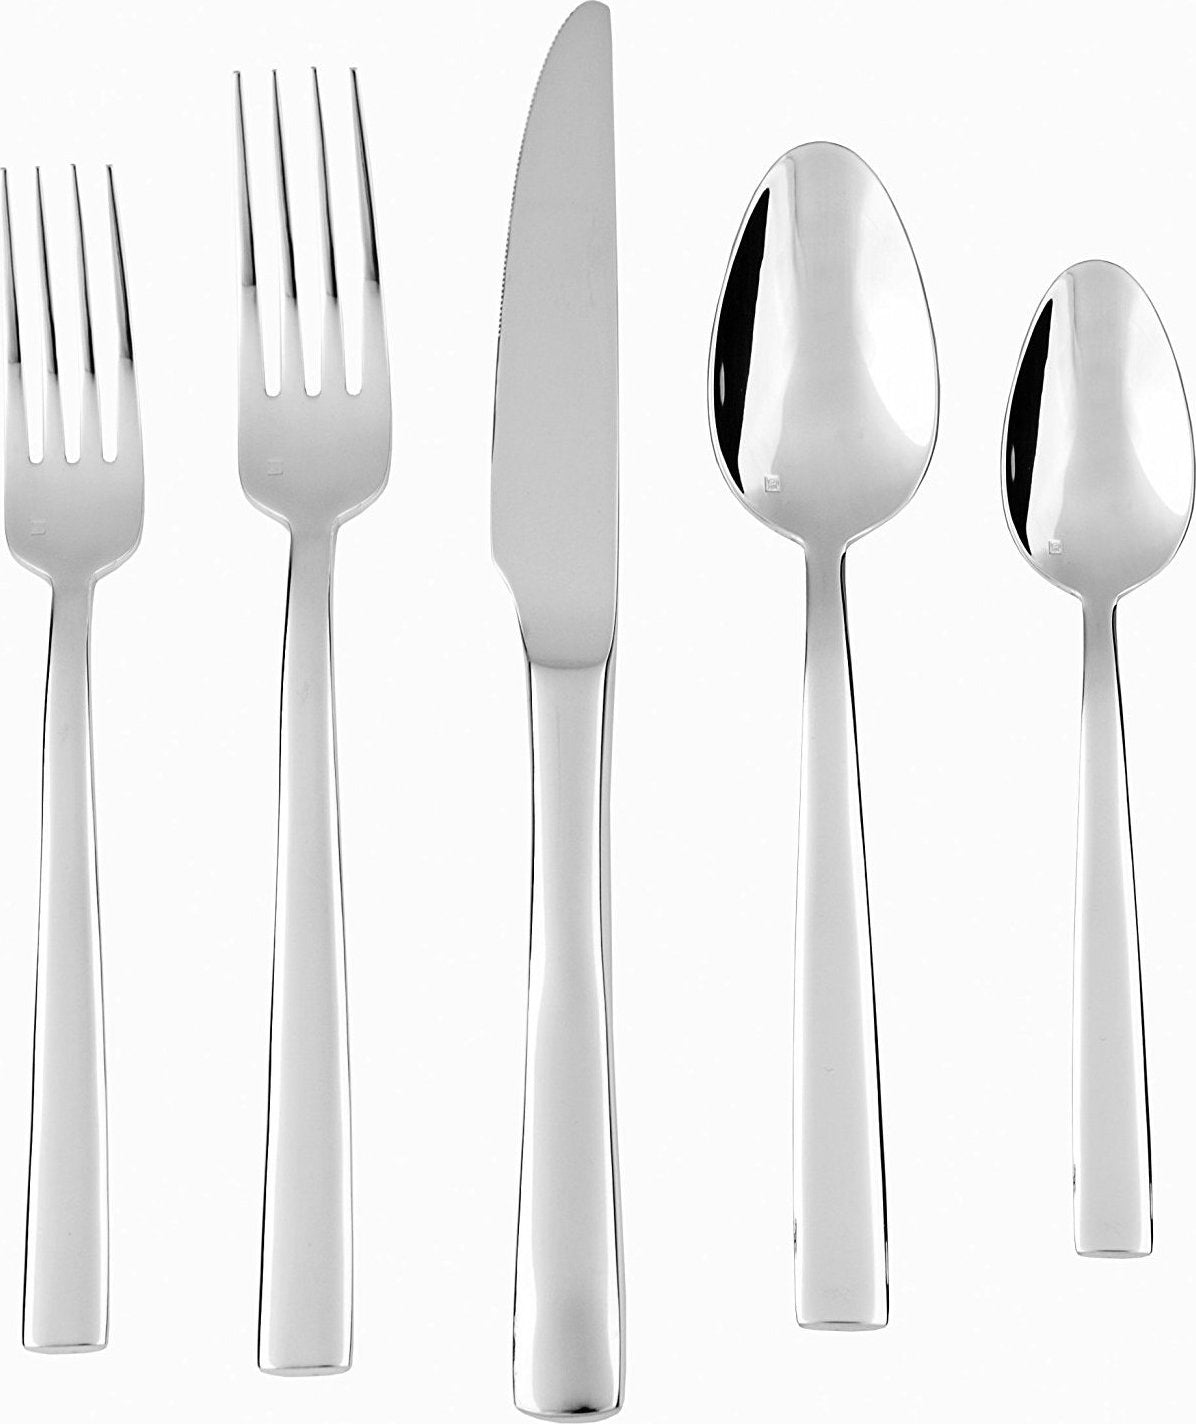 Fortessa - 5 PC Catana Stainless Steel Place Setting - 5PPS-900-05